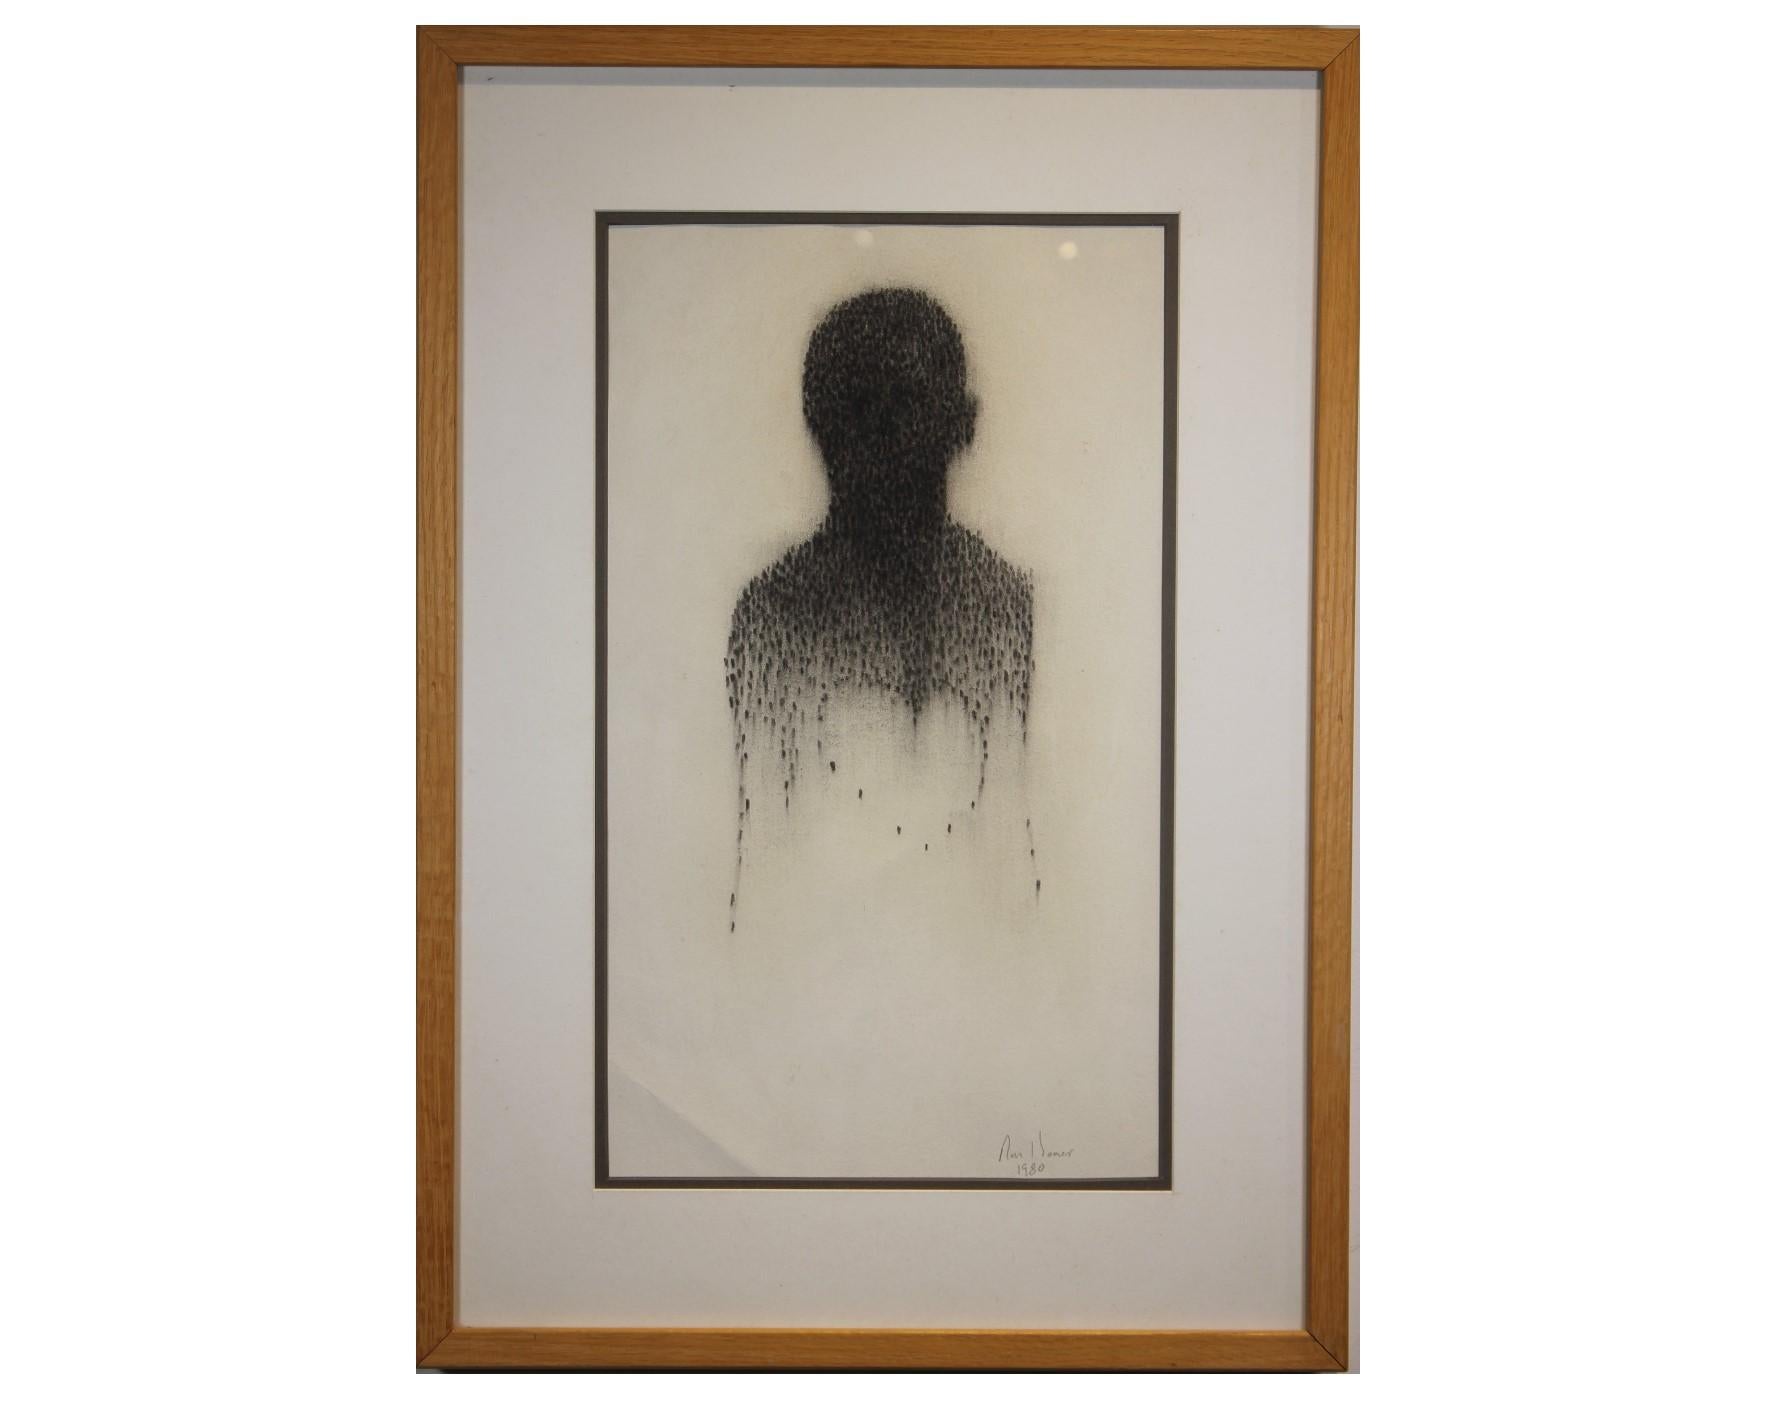 Untitled figurative abstract drawing by Ron Hoover of a silhouette with a heart done in a pointillism style circa 1980. Charcoal on paper. 
Dimensions without Frame: H 18 in x W 10 in.

Artist Biography:
Ron Hoover was a Texas artist who was well